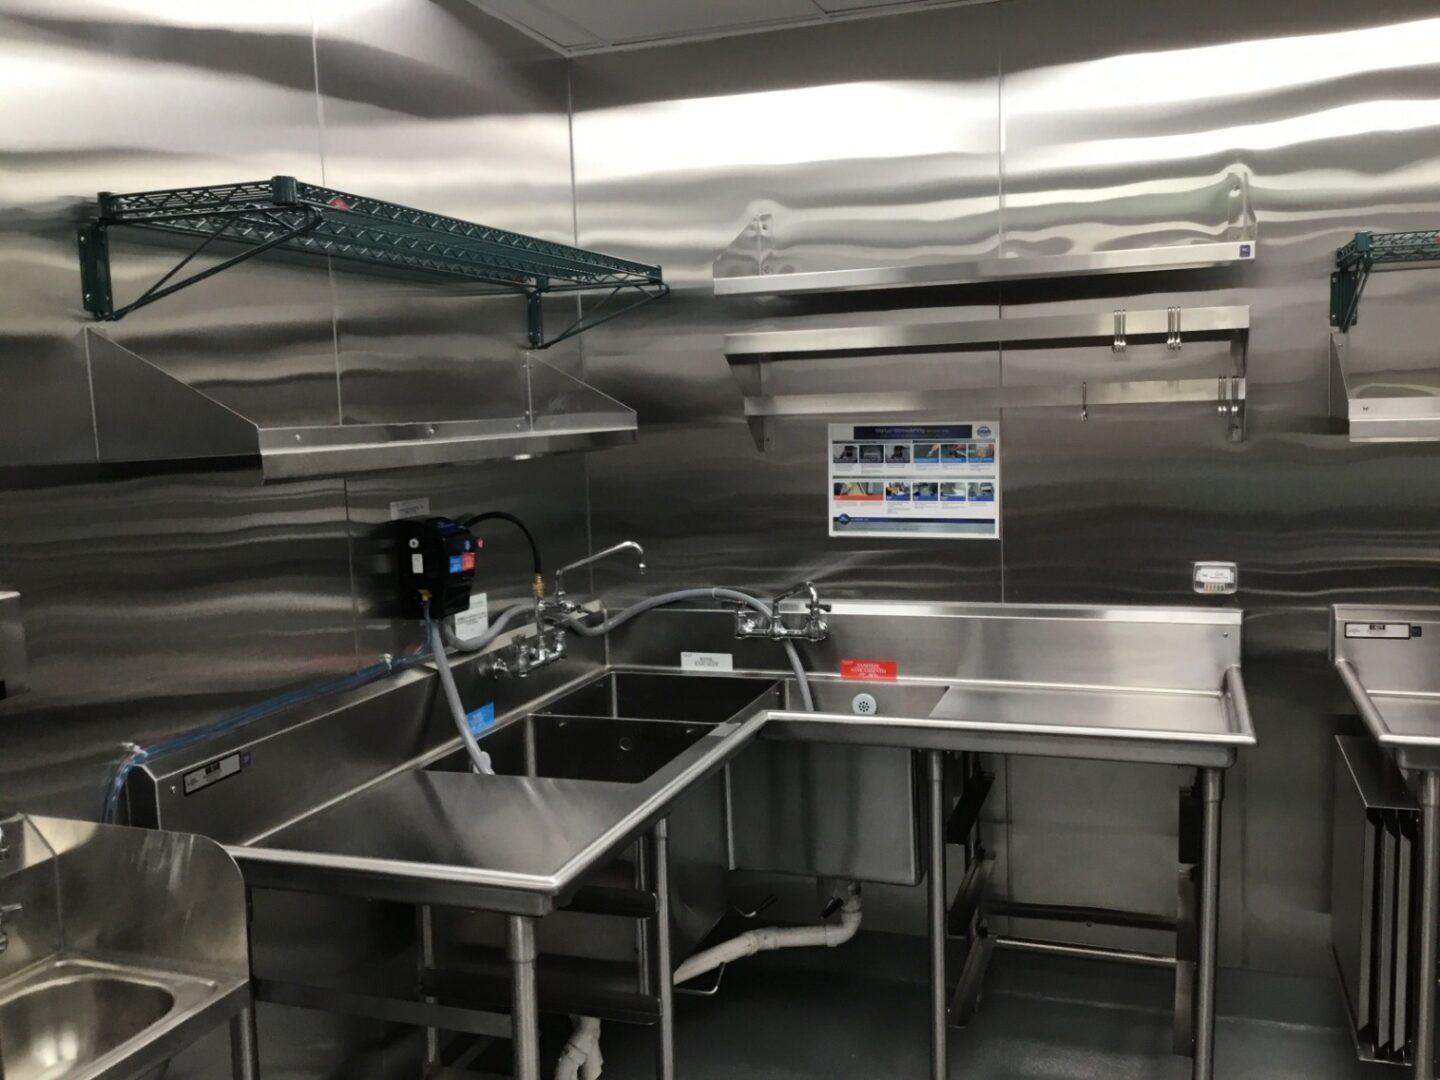 Picture of hotel kitchen